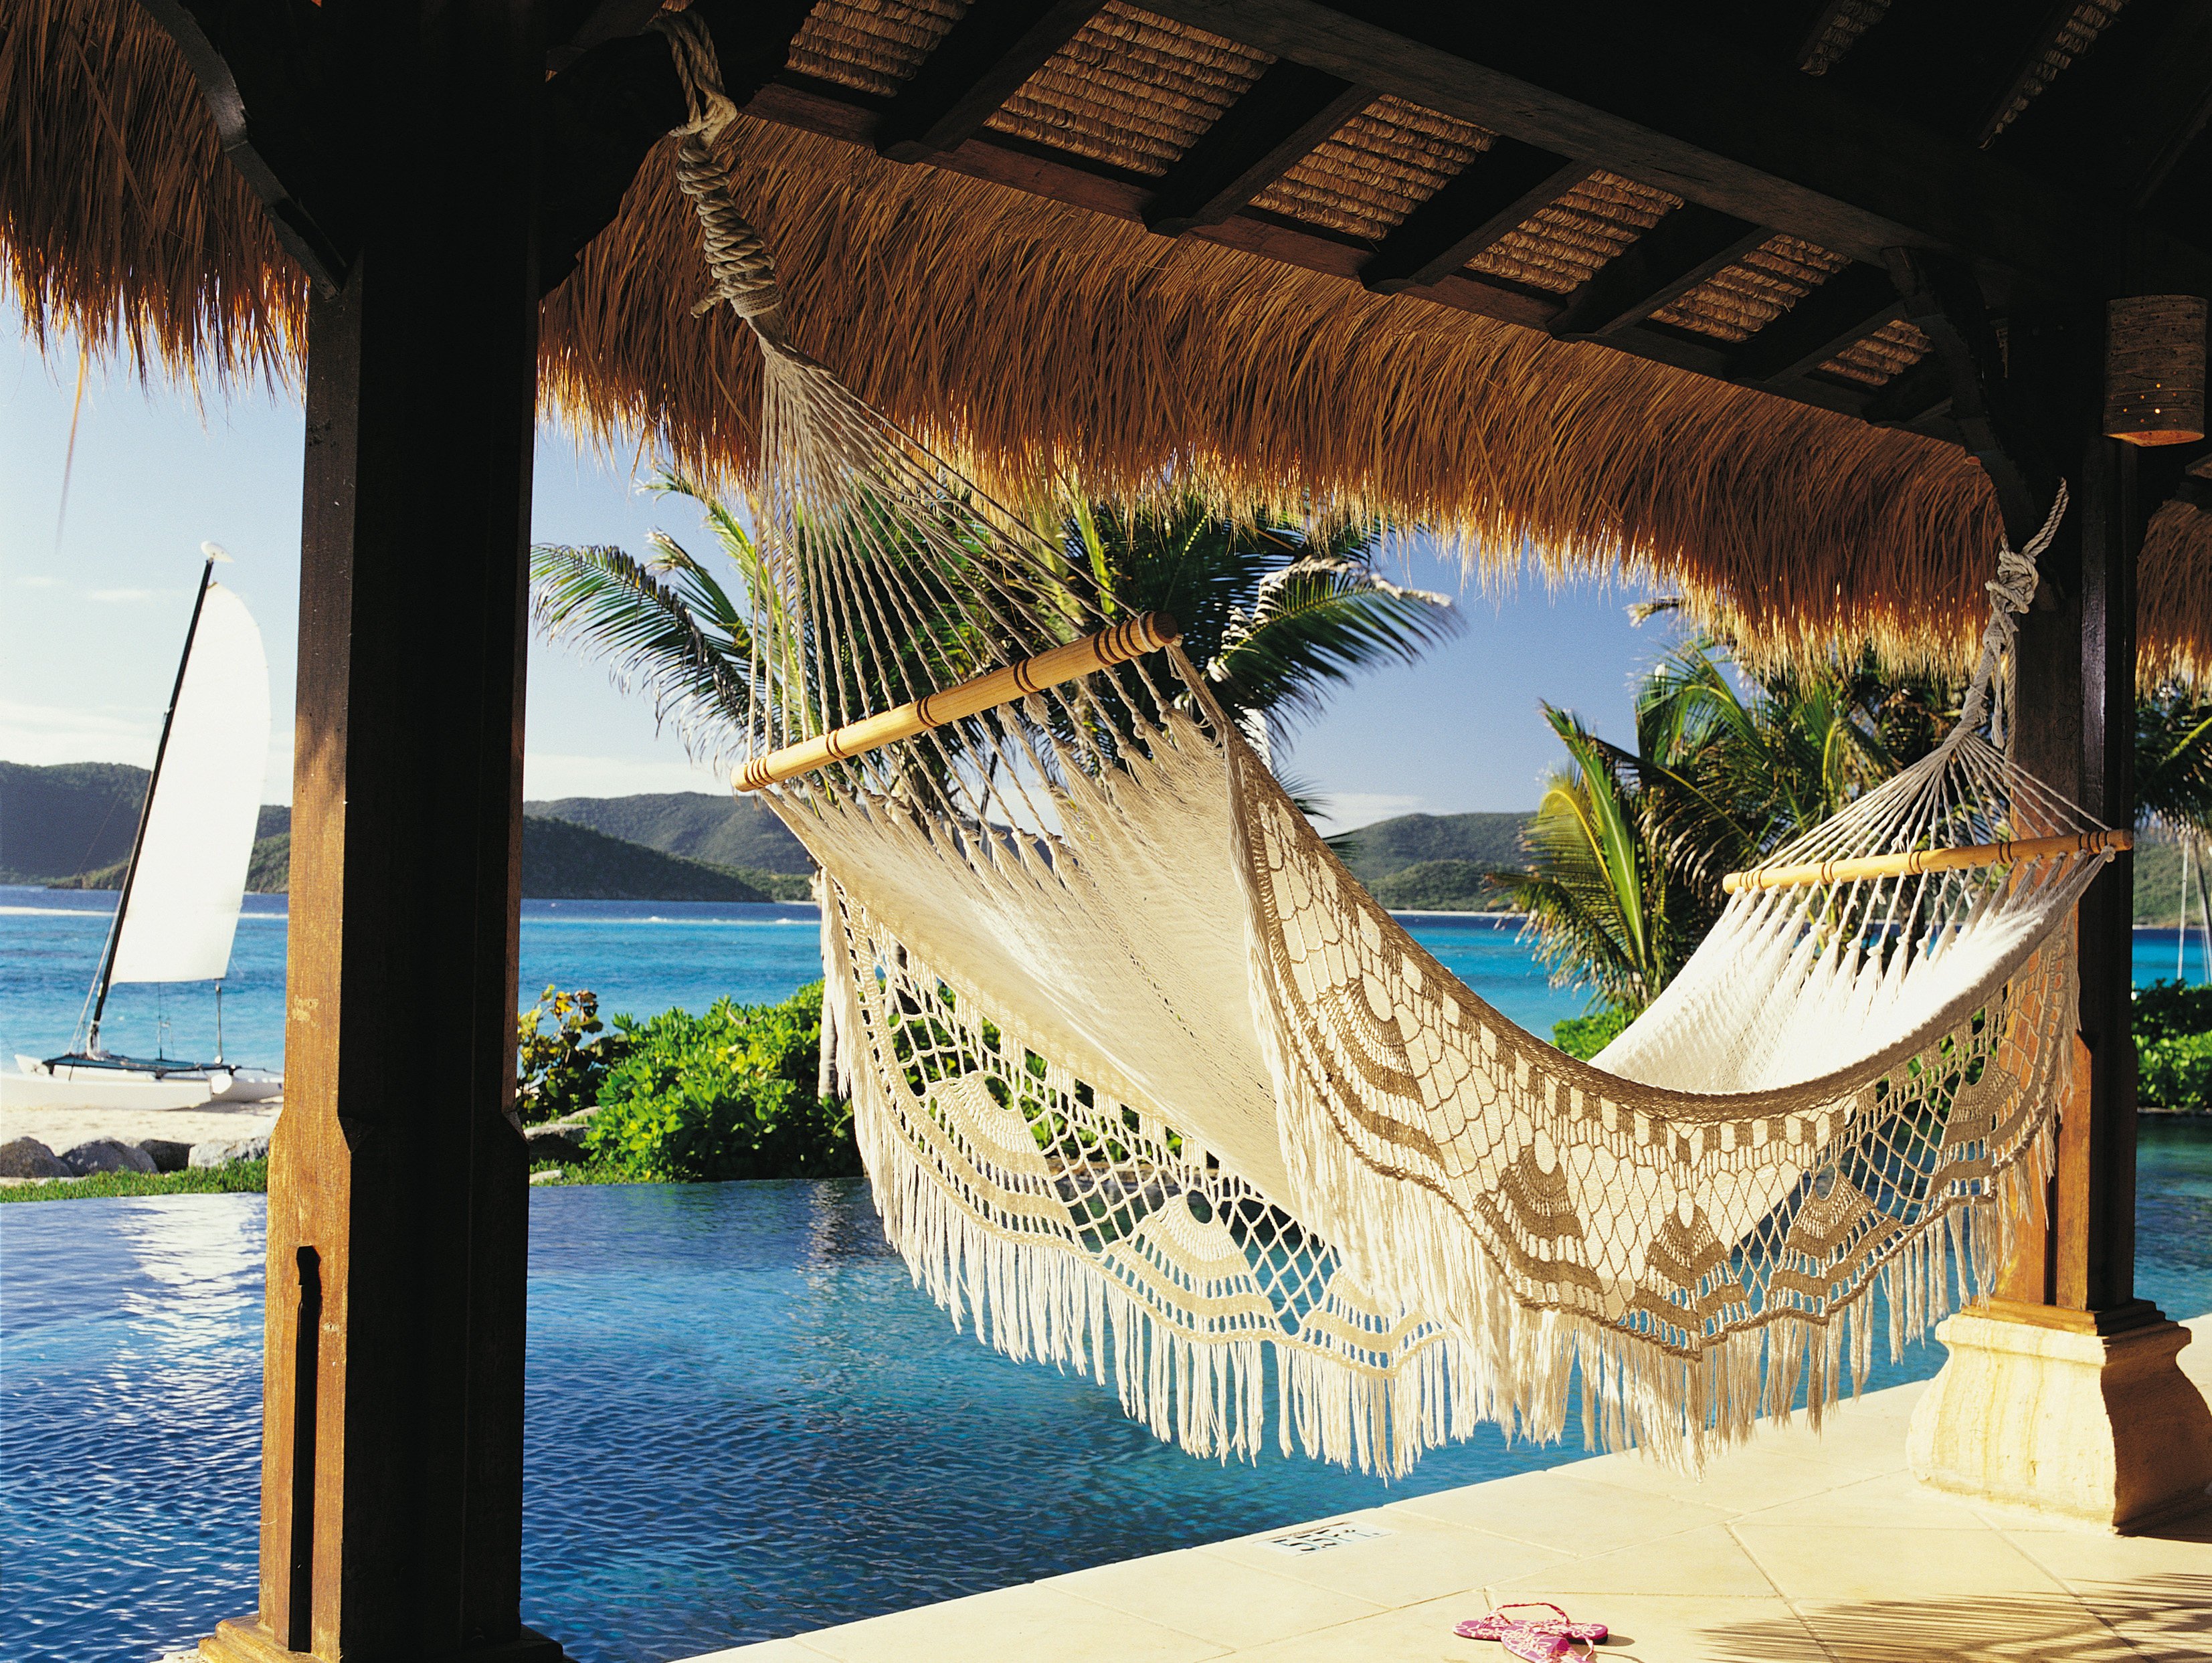 Necker Island is Richard Branson’s private paradise in the Caribbean. Photo: Handout